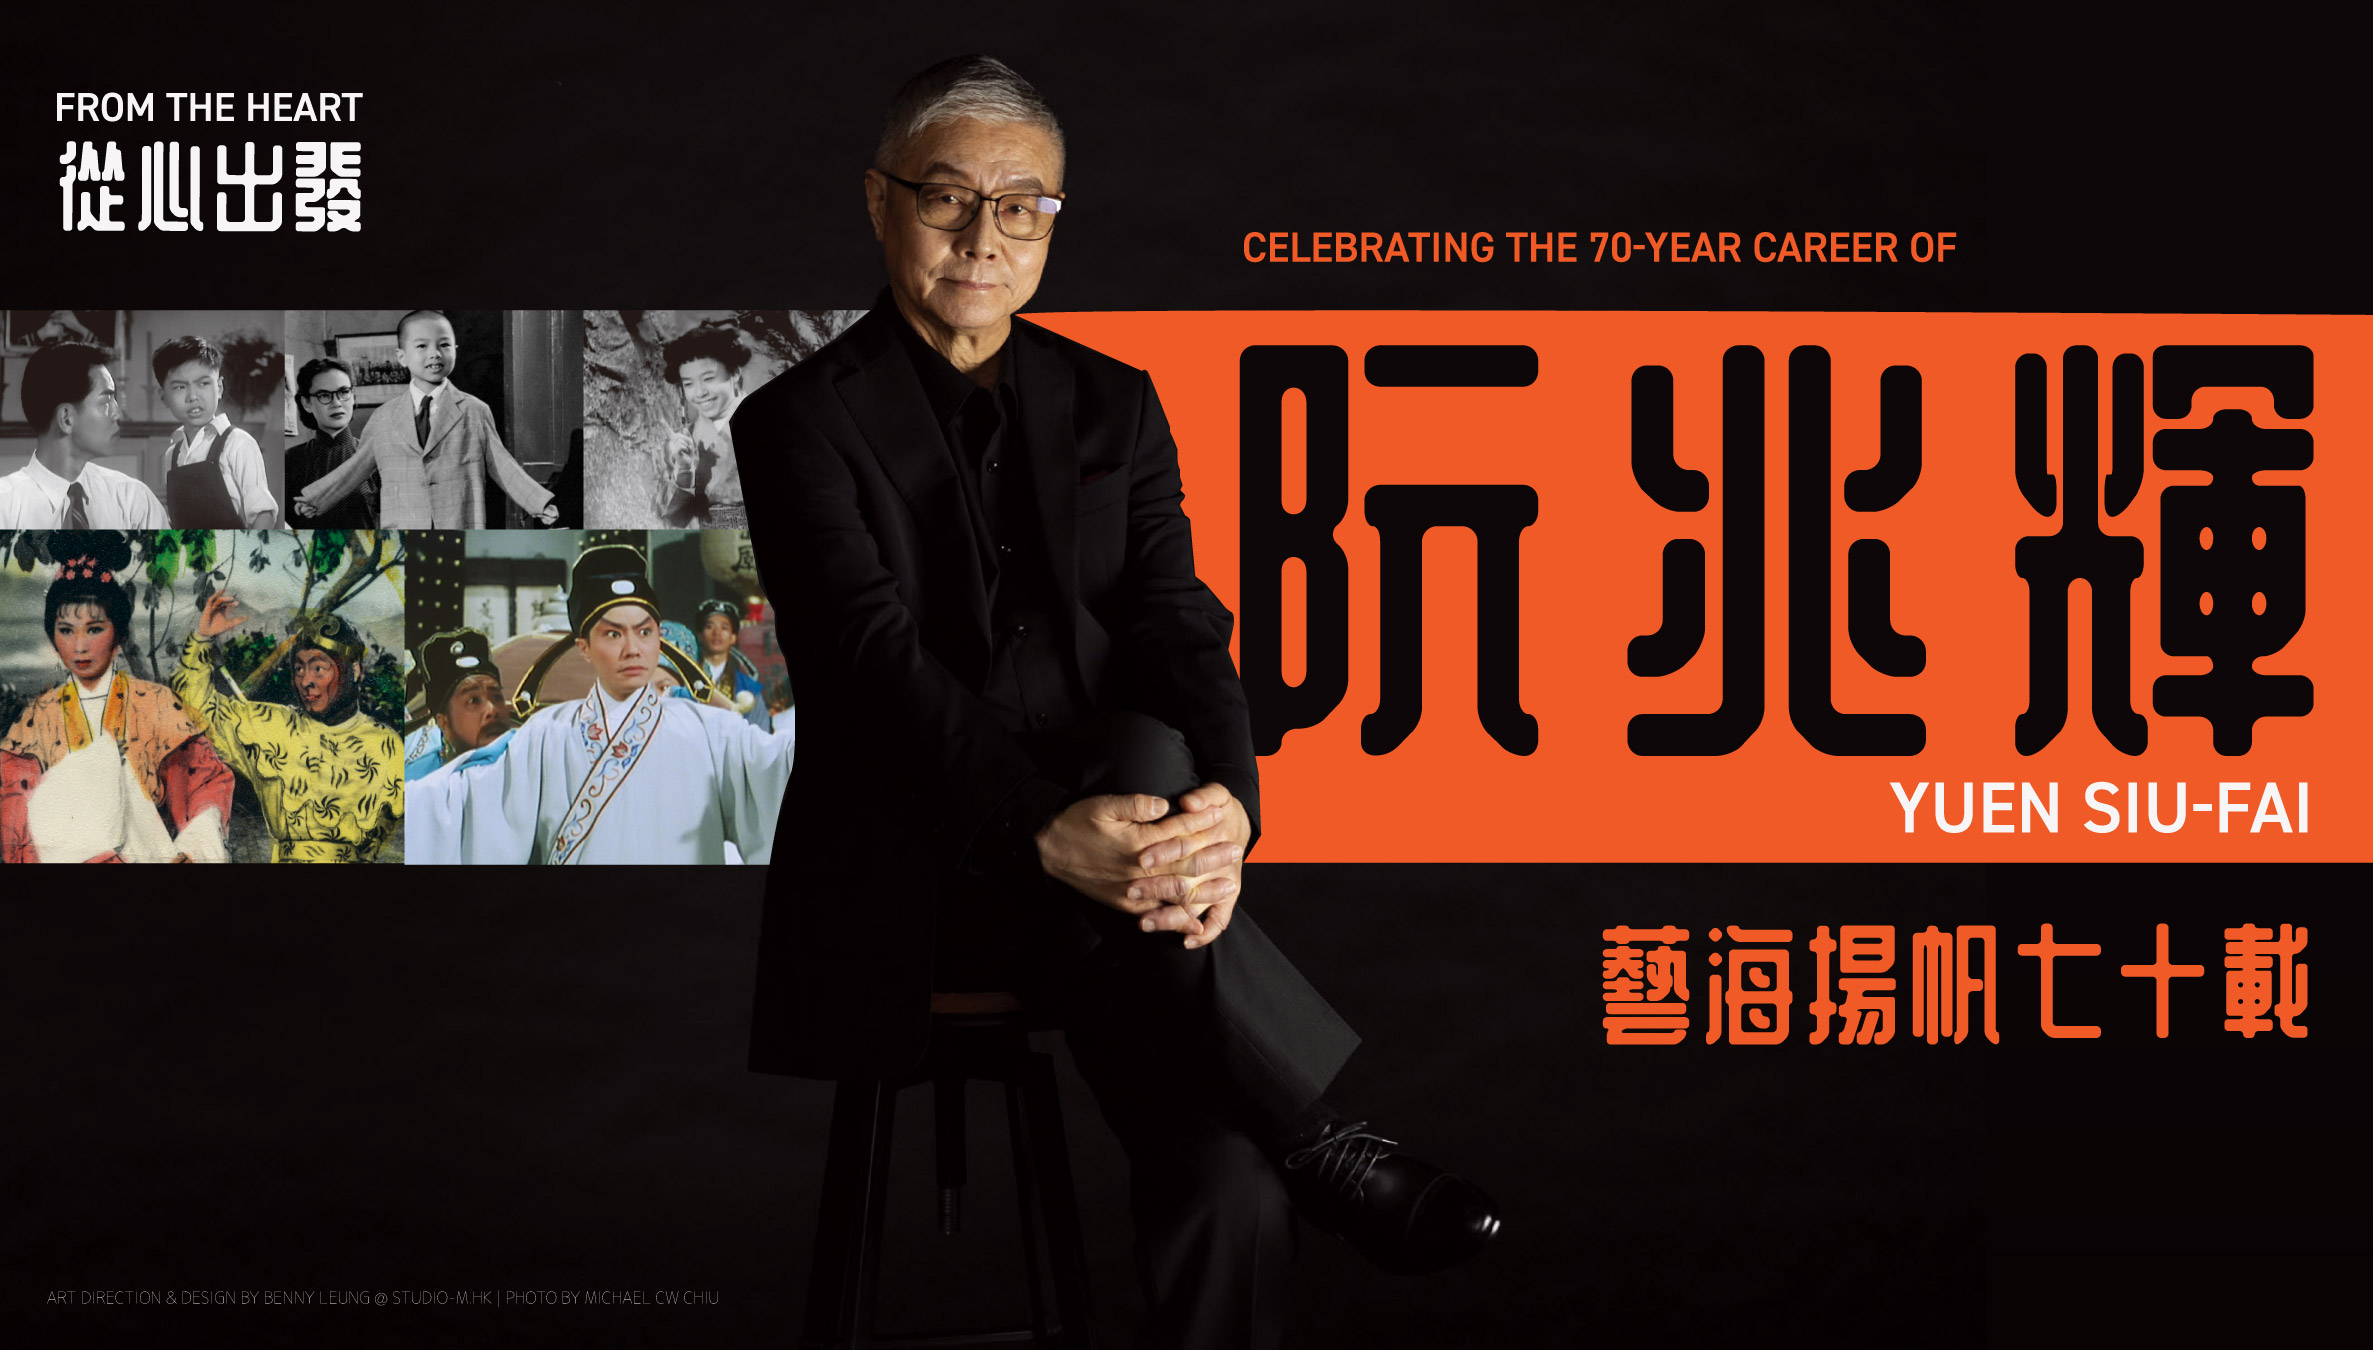 From the Heart – Celebrating the 70-year Career of Yuen Siu-fai